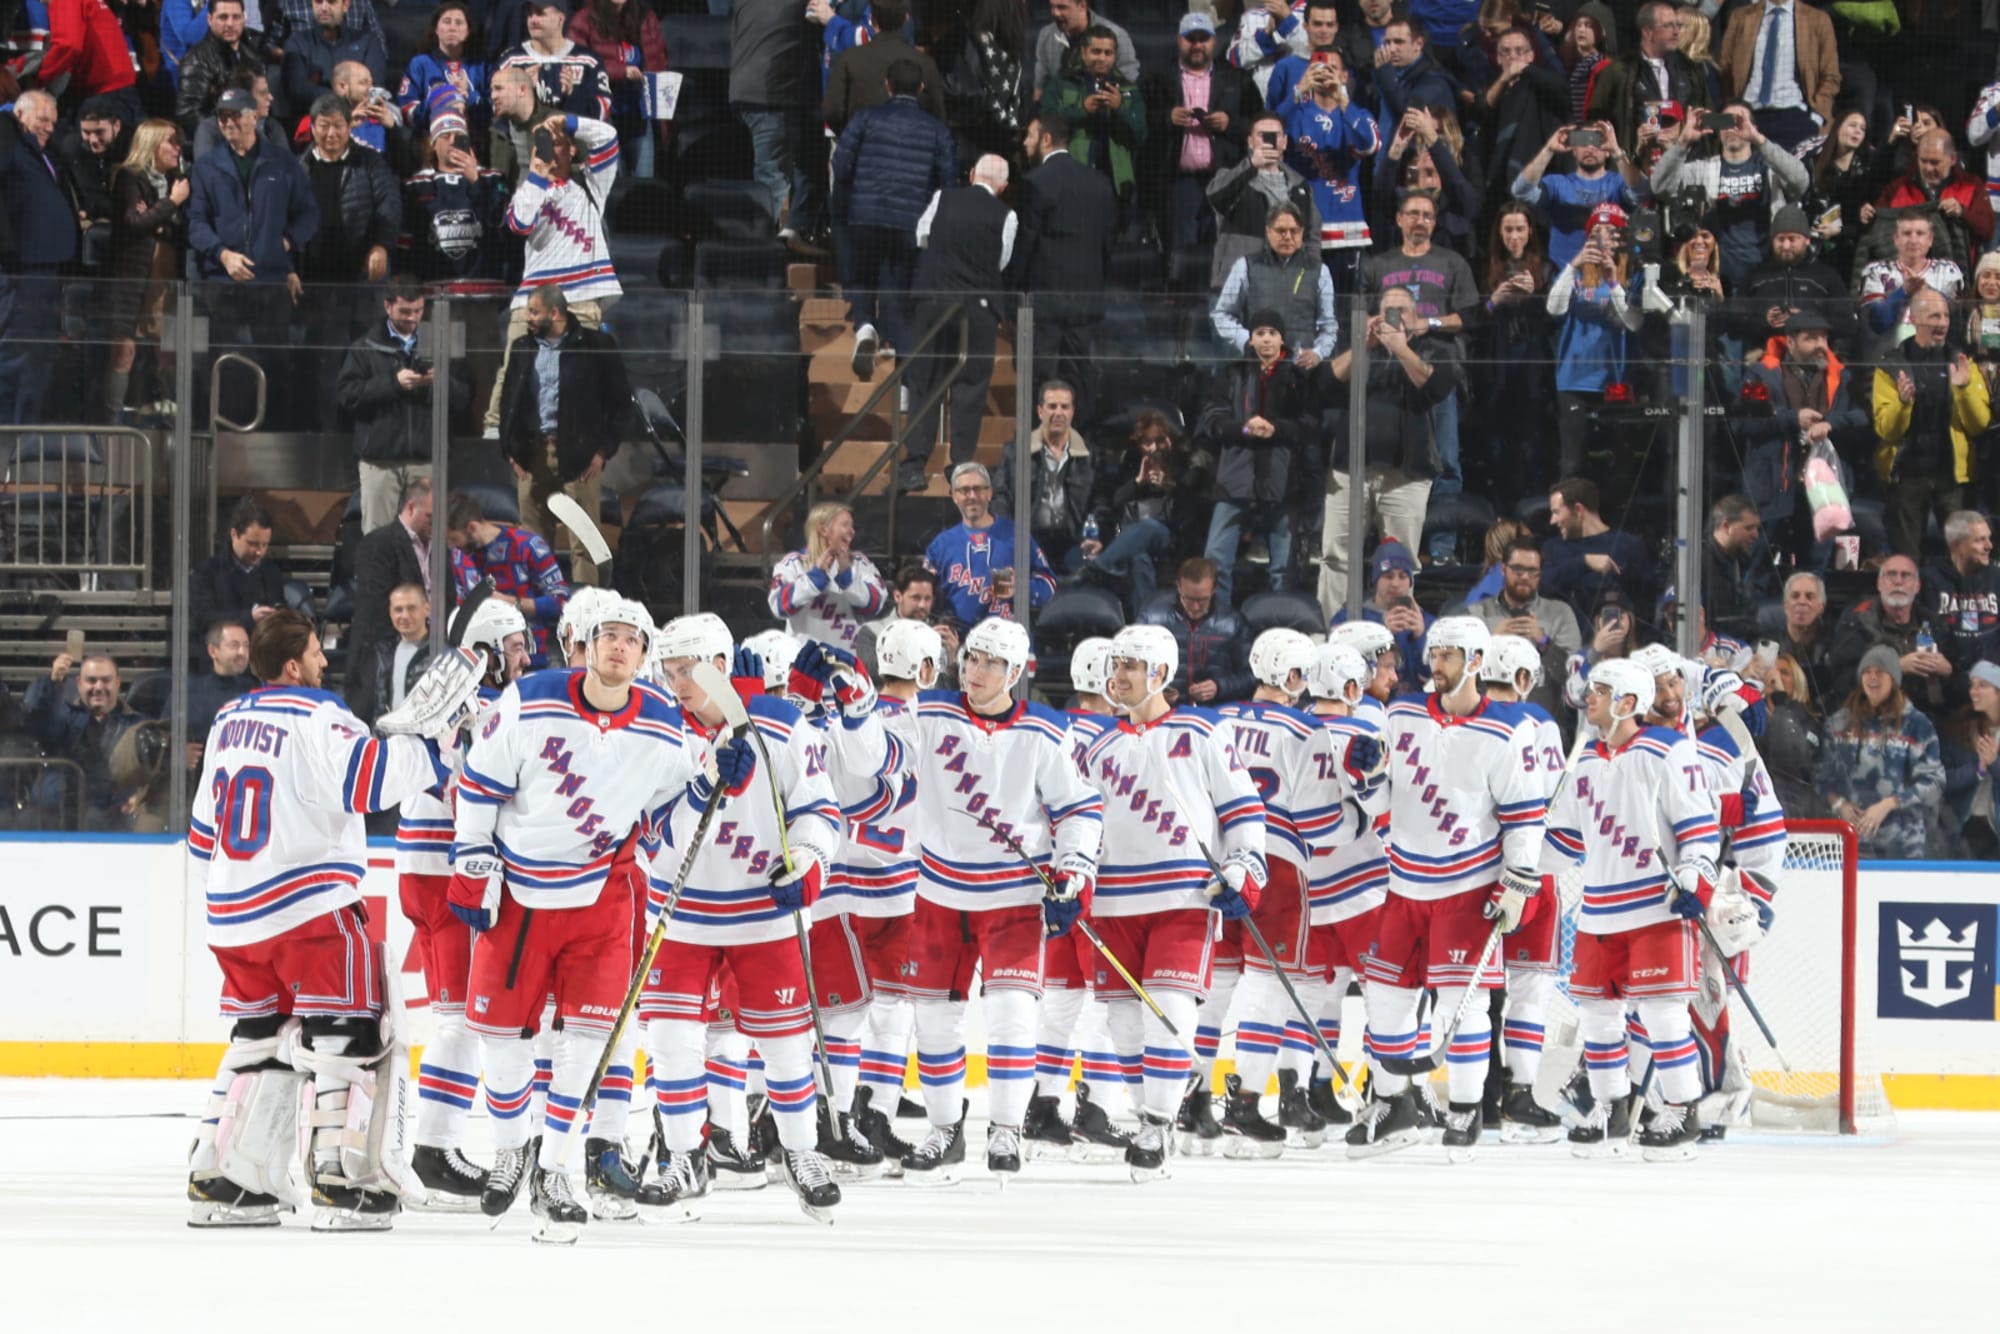 New York Rangers How many roster spots will be open next season?